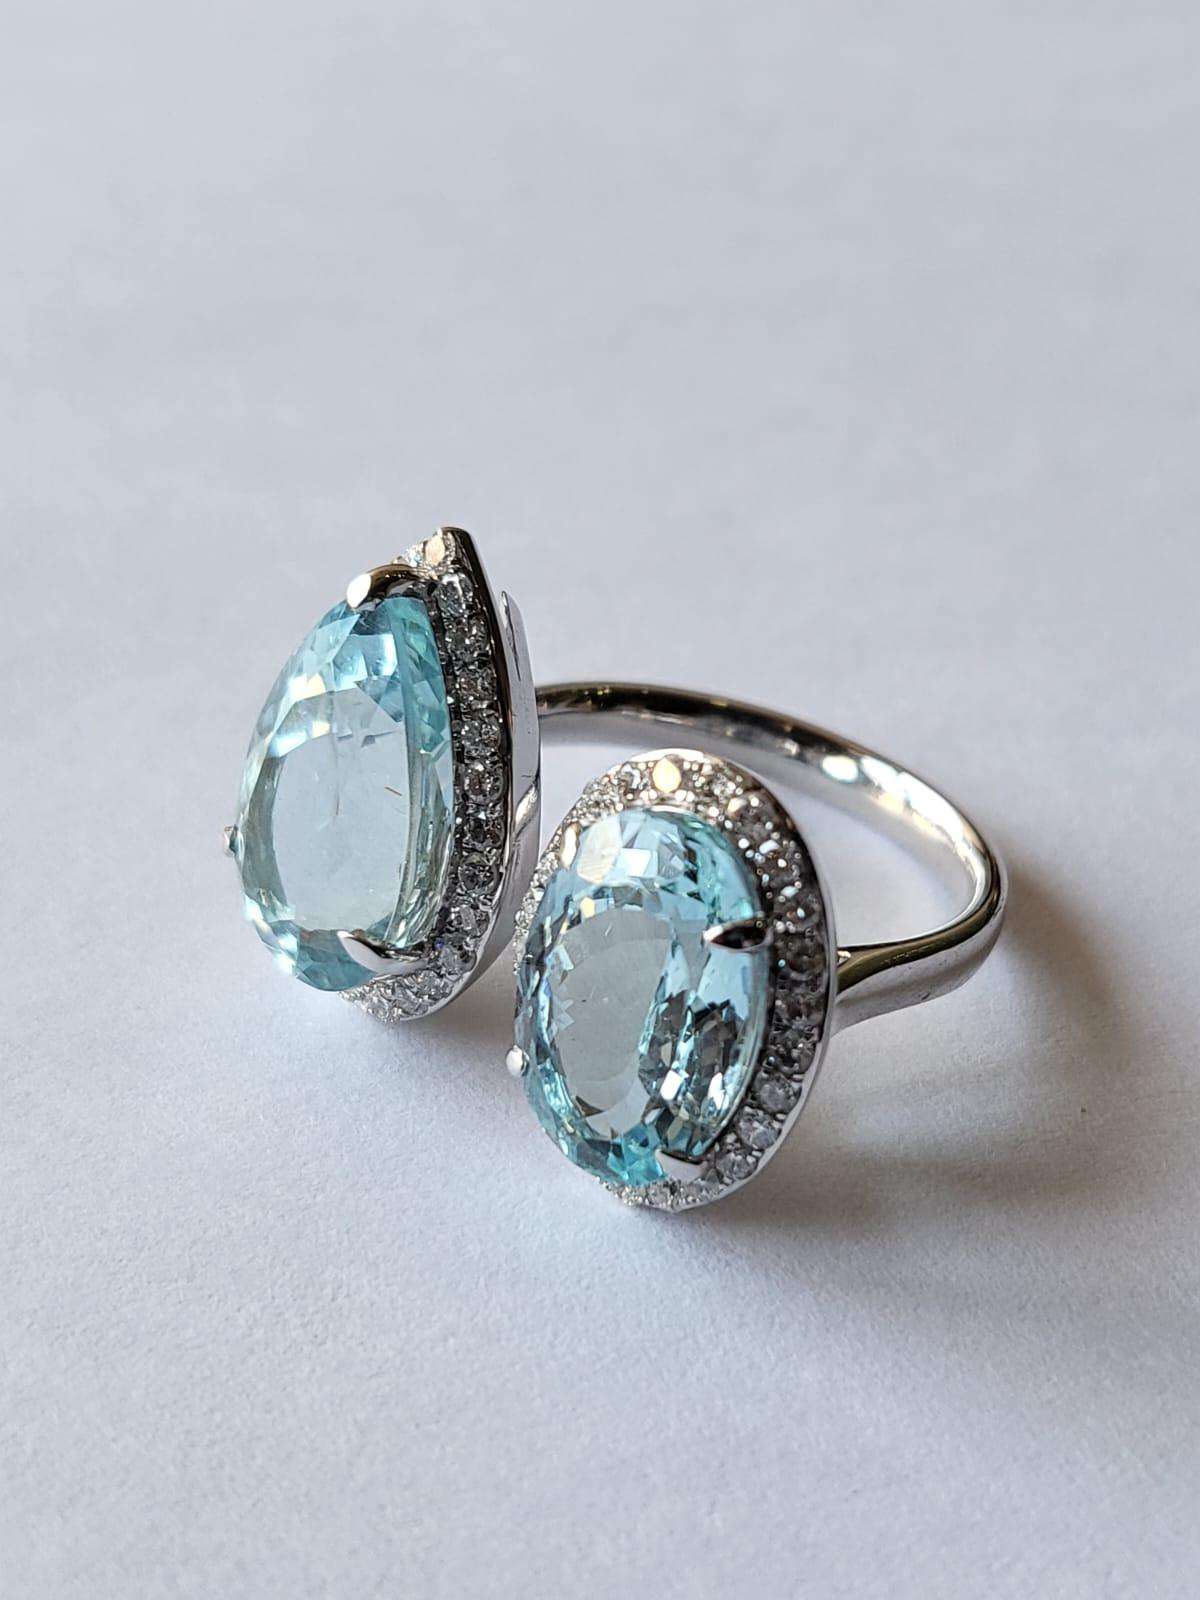 Pear Cut Set in 18k White Gold 7.96 Carats Aquamarine & Diamonds Two Finger/Cocktail Ring